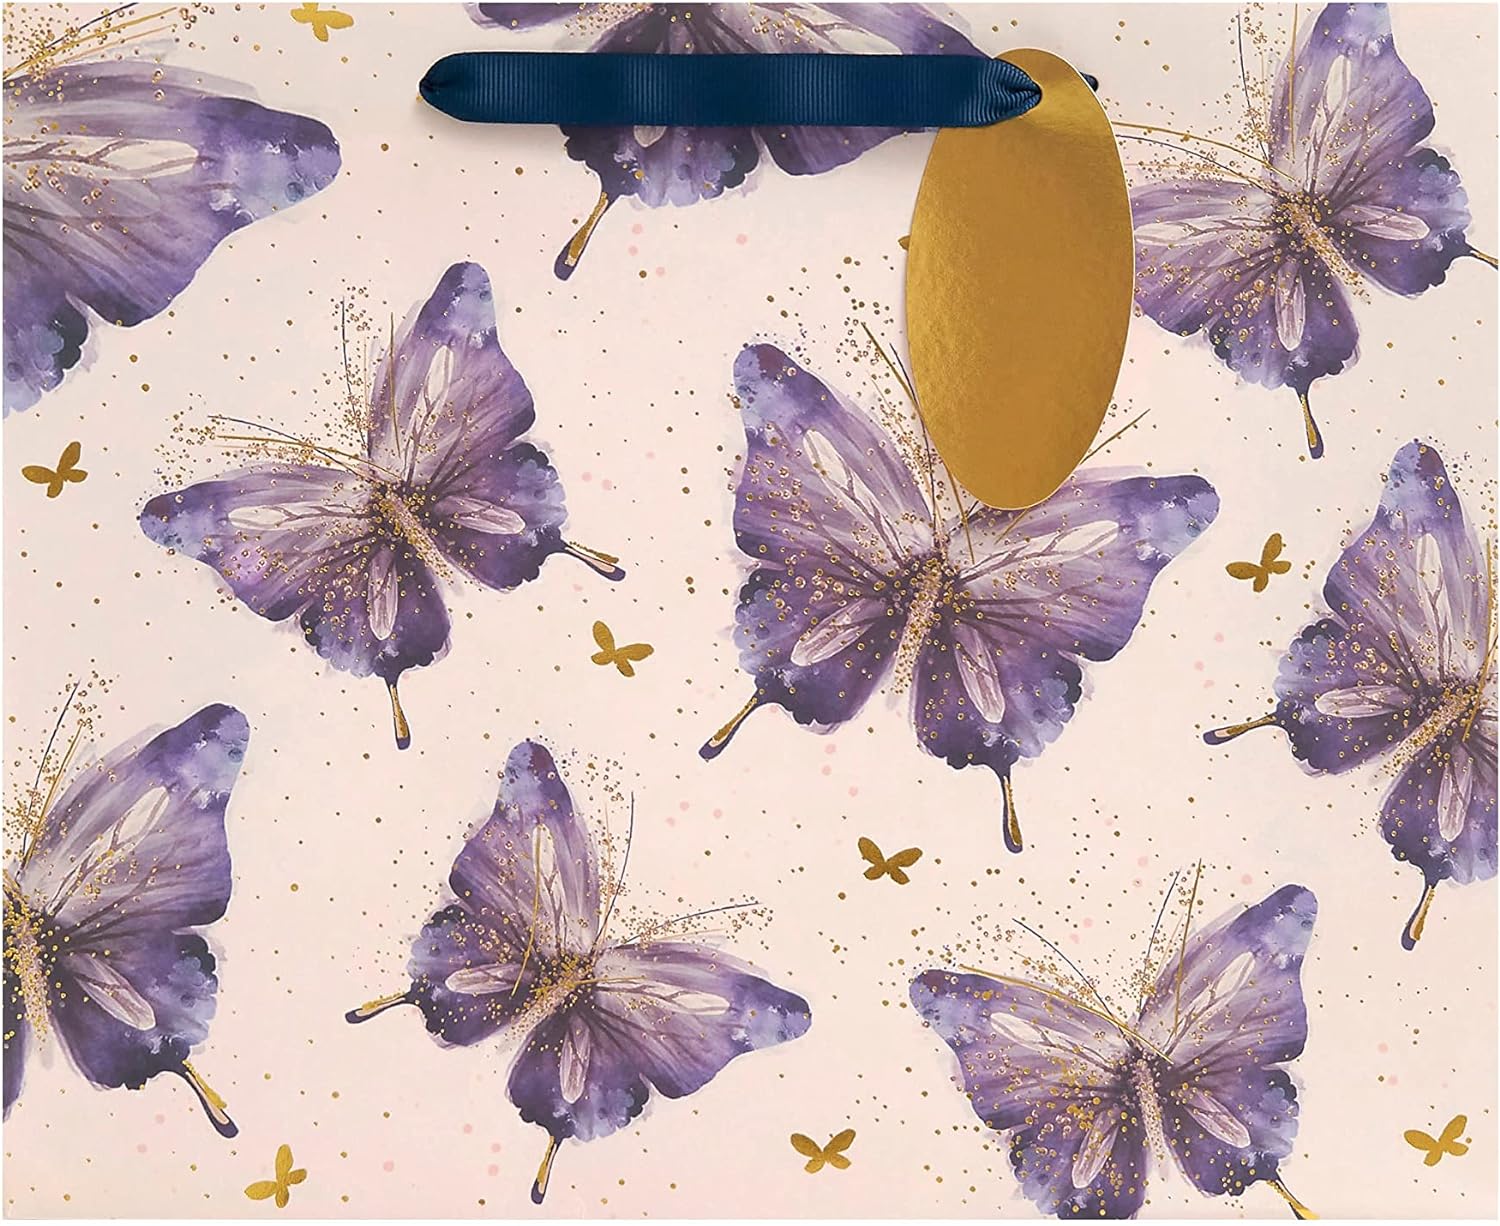 Butterfly Design Large Gift Bag